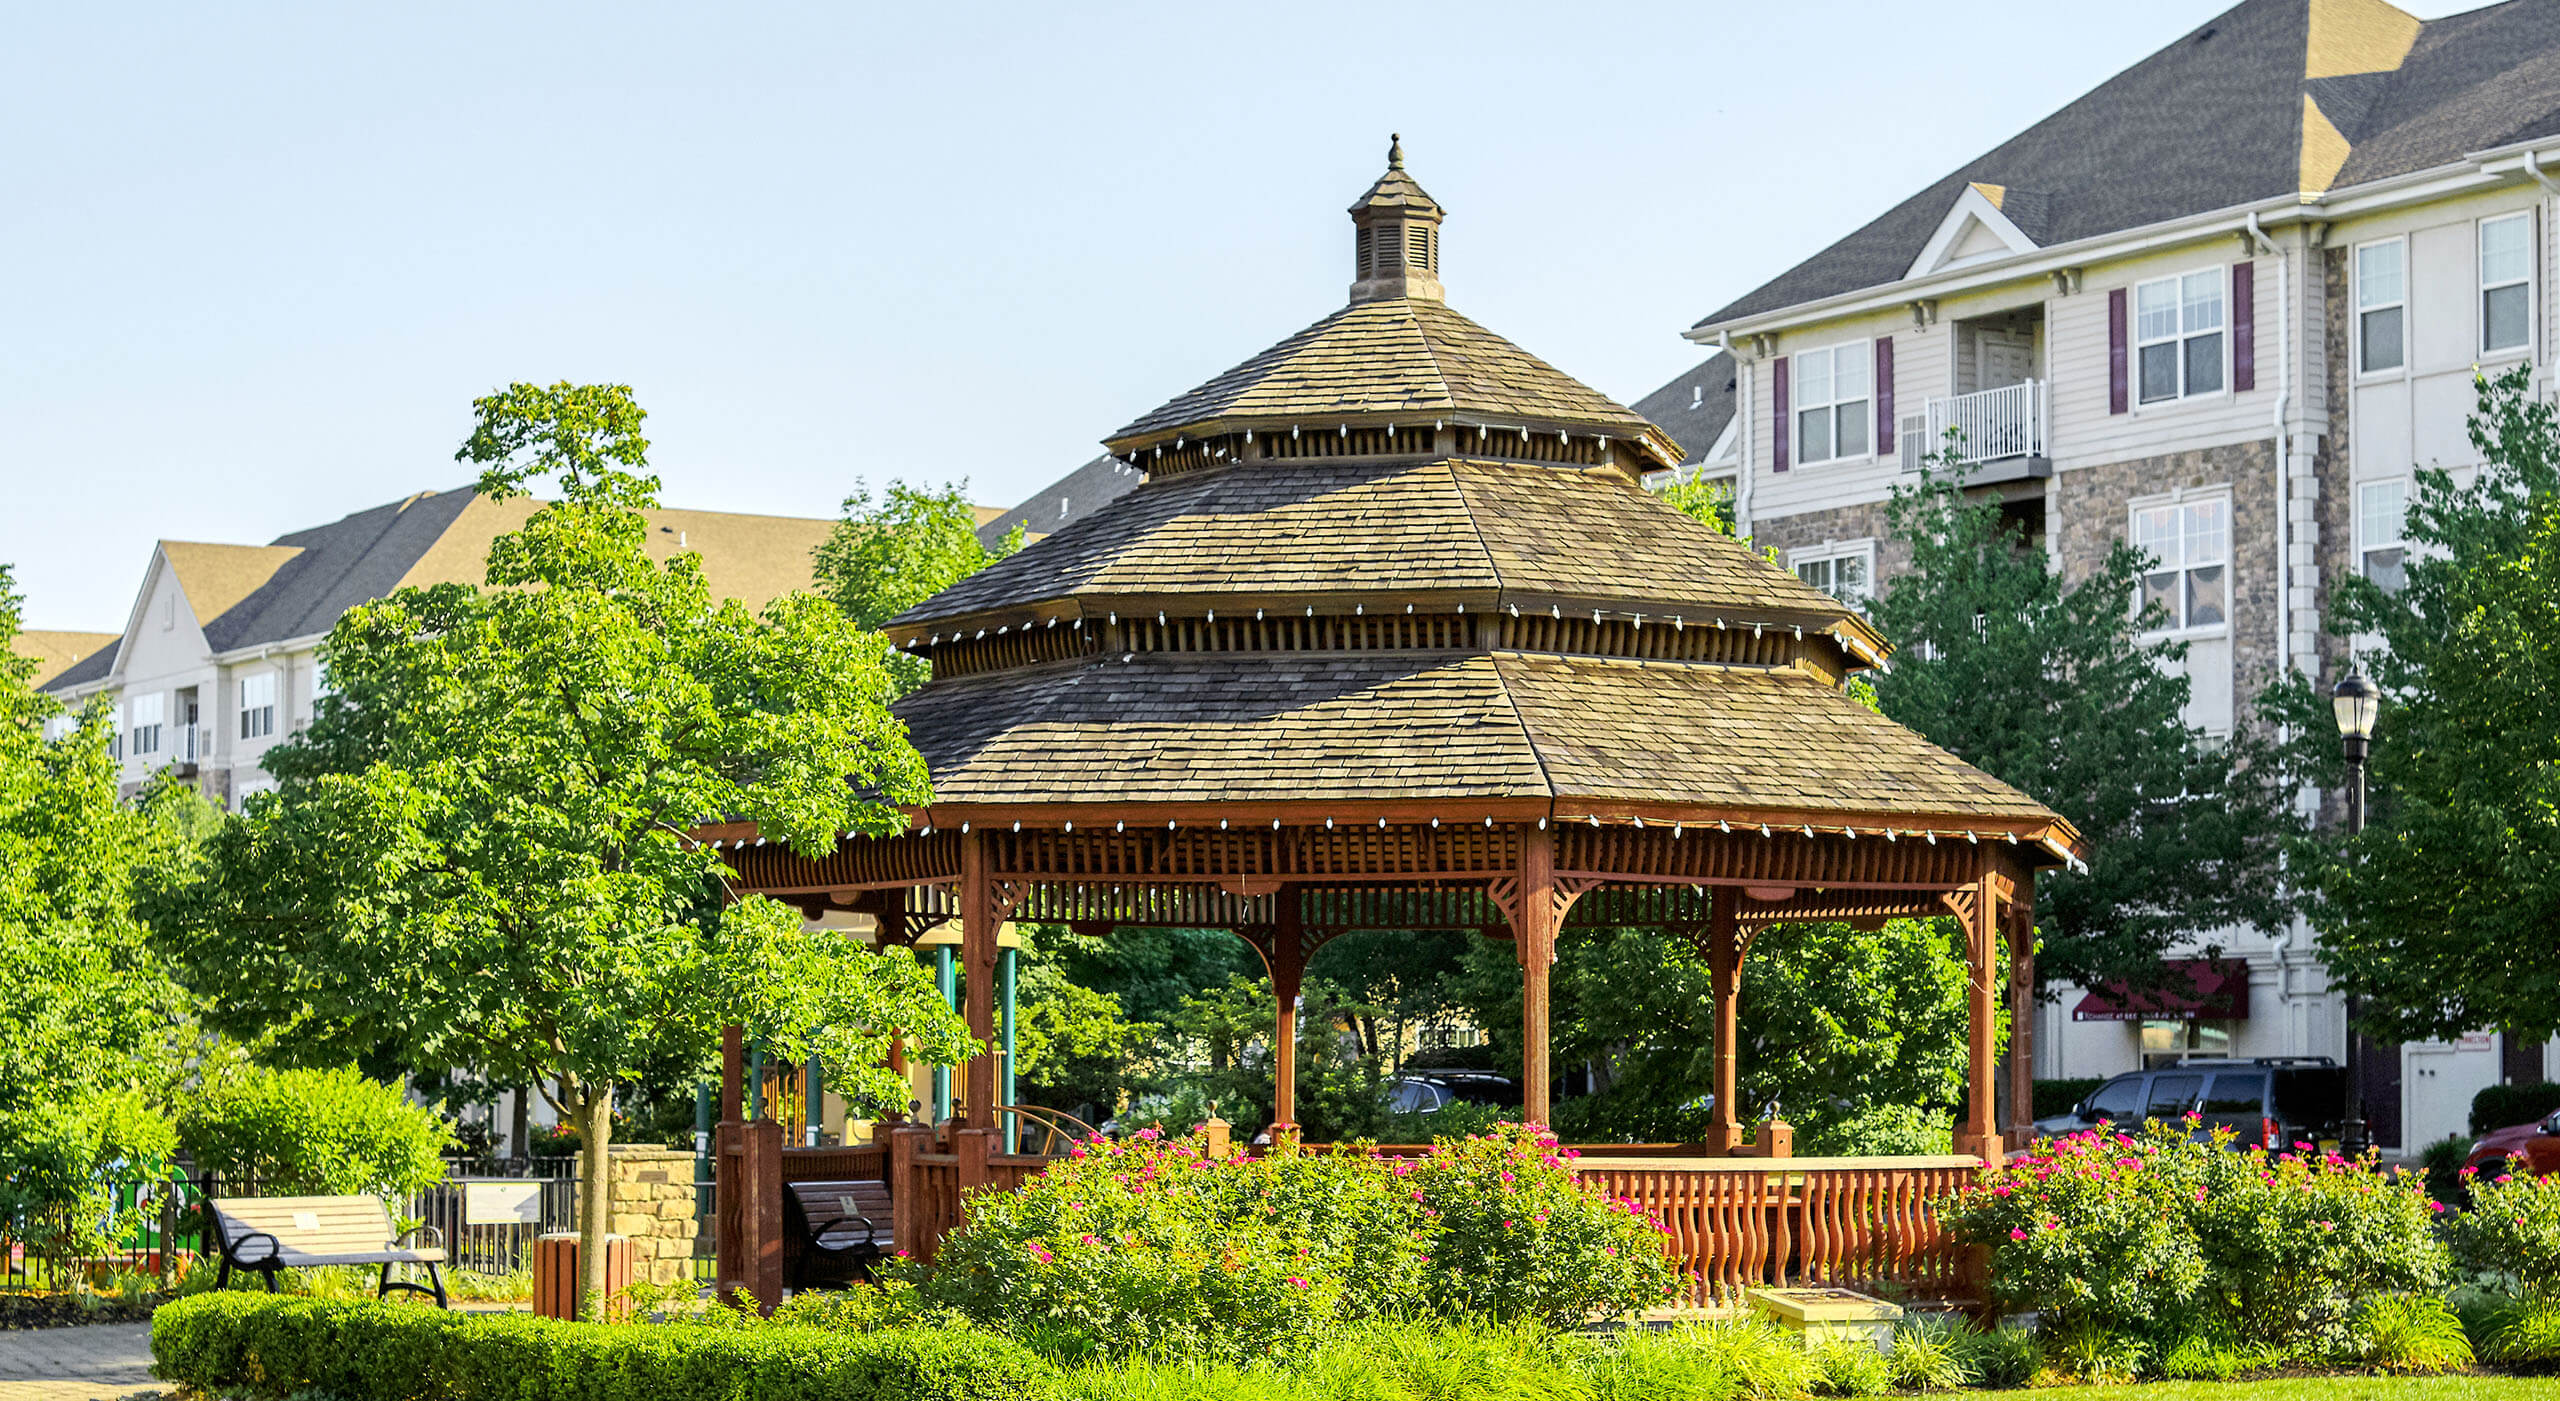 Gazebo surrounded by trees and bushes in the middle of Xchange's community green space